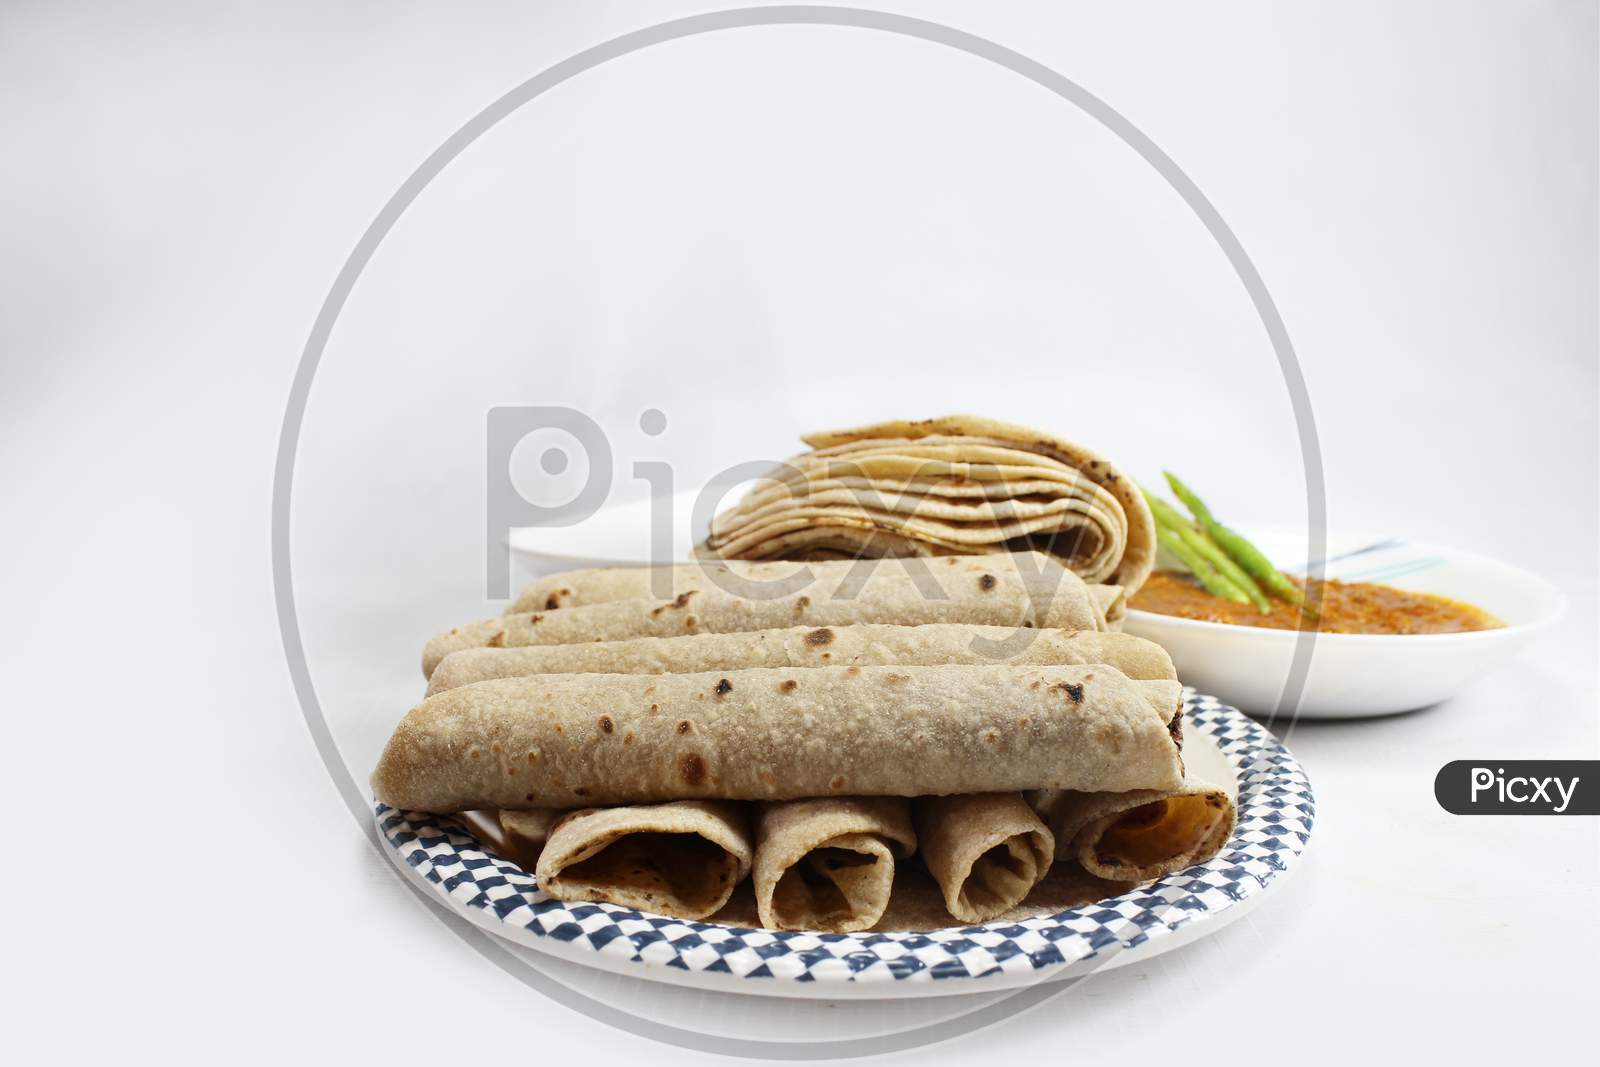 Popular Indian flatbread roti or chapati made from wheat flour